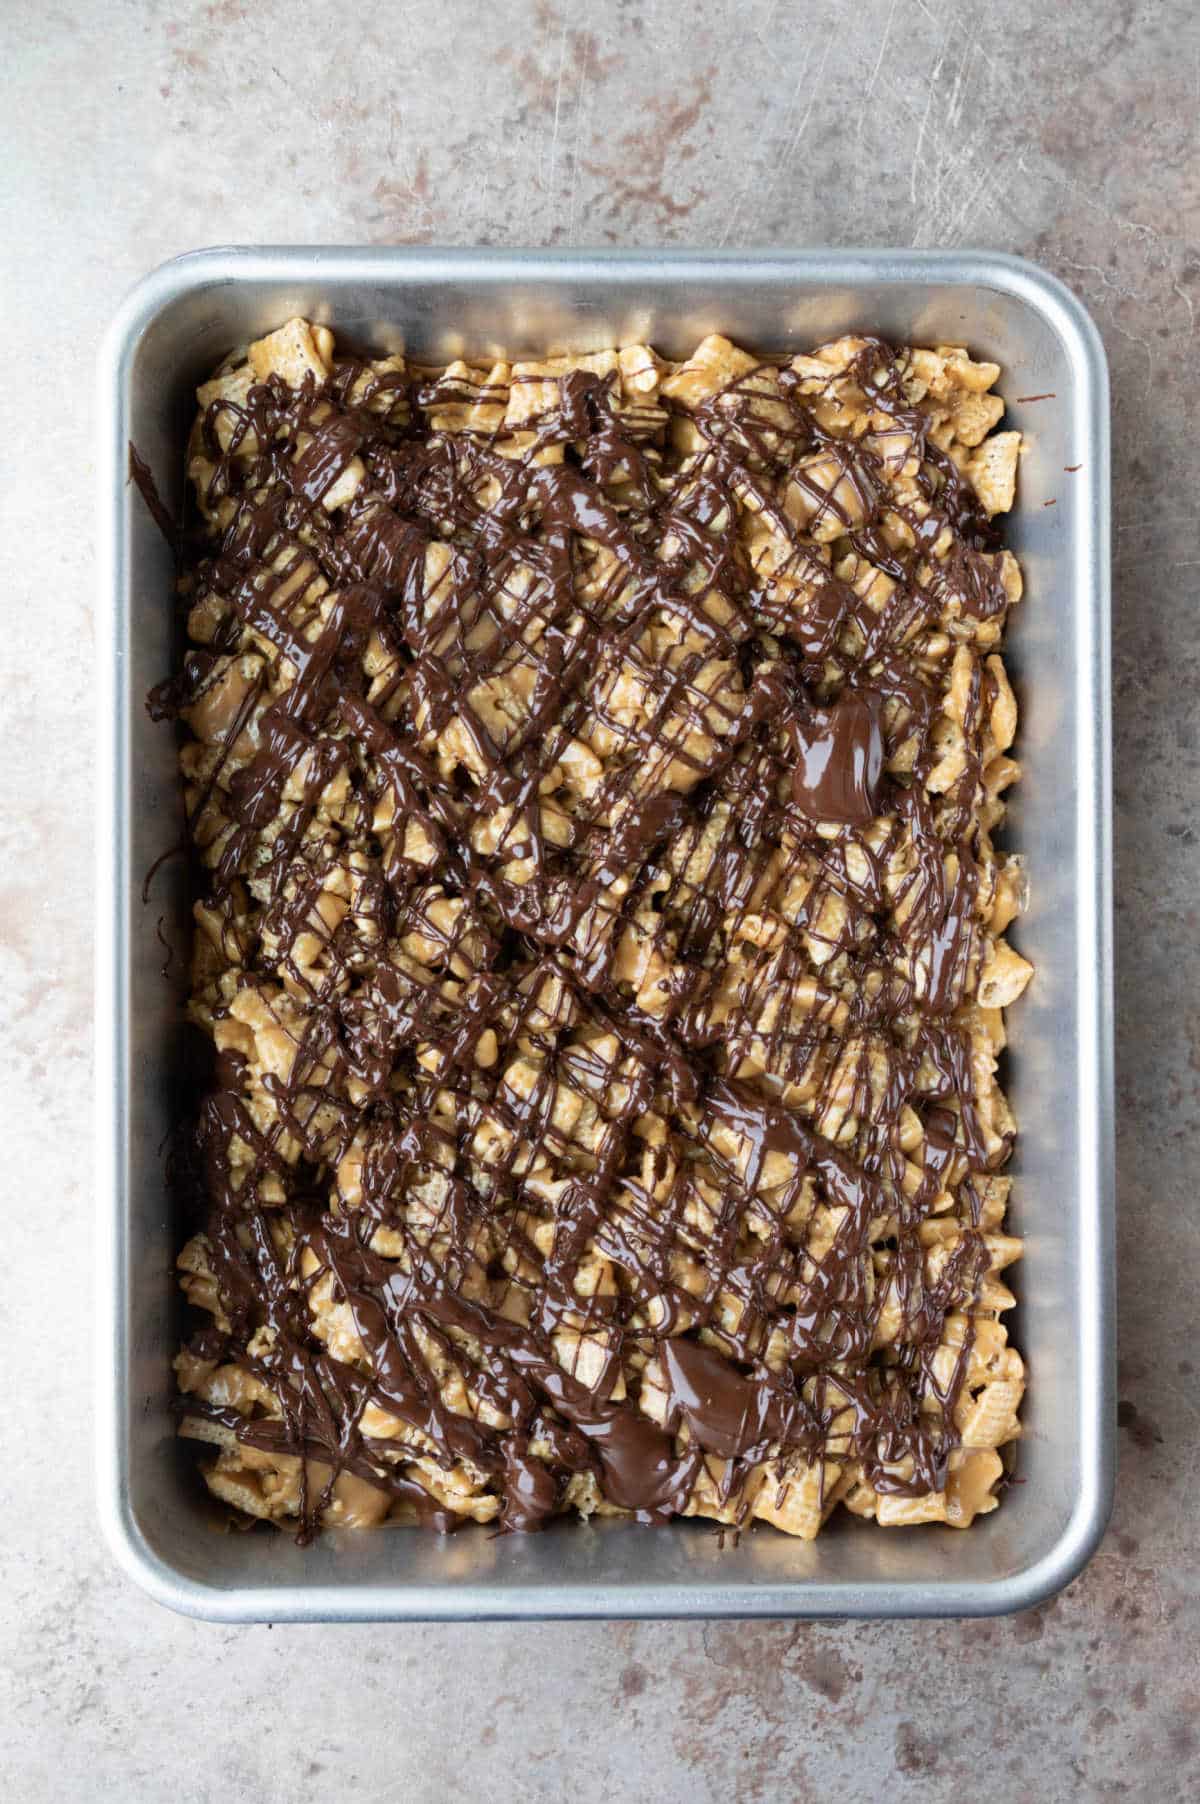 Chocolate drizzled peanut butter Chex cereal treats in a baking pan.